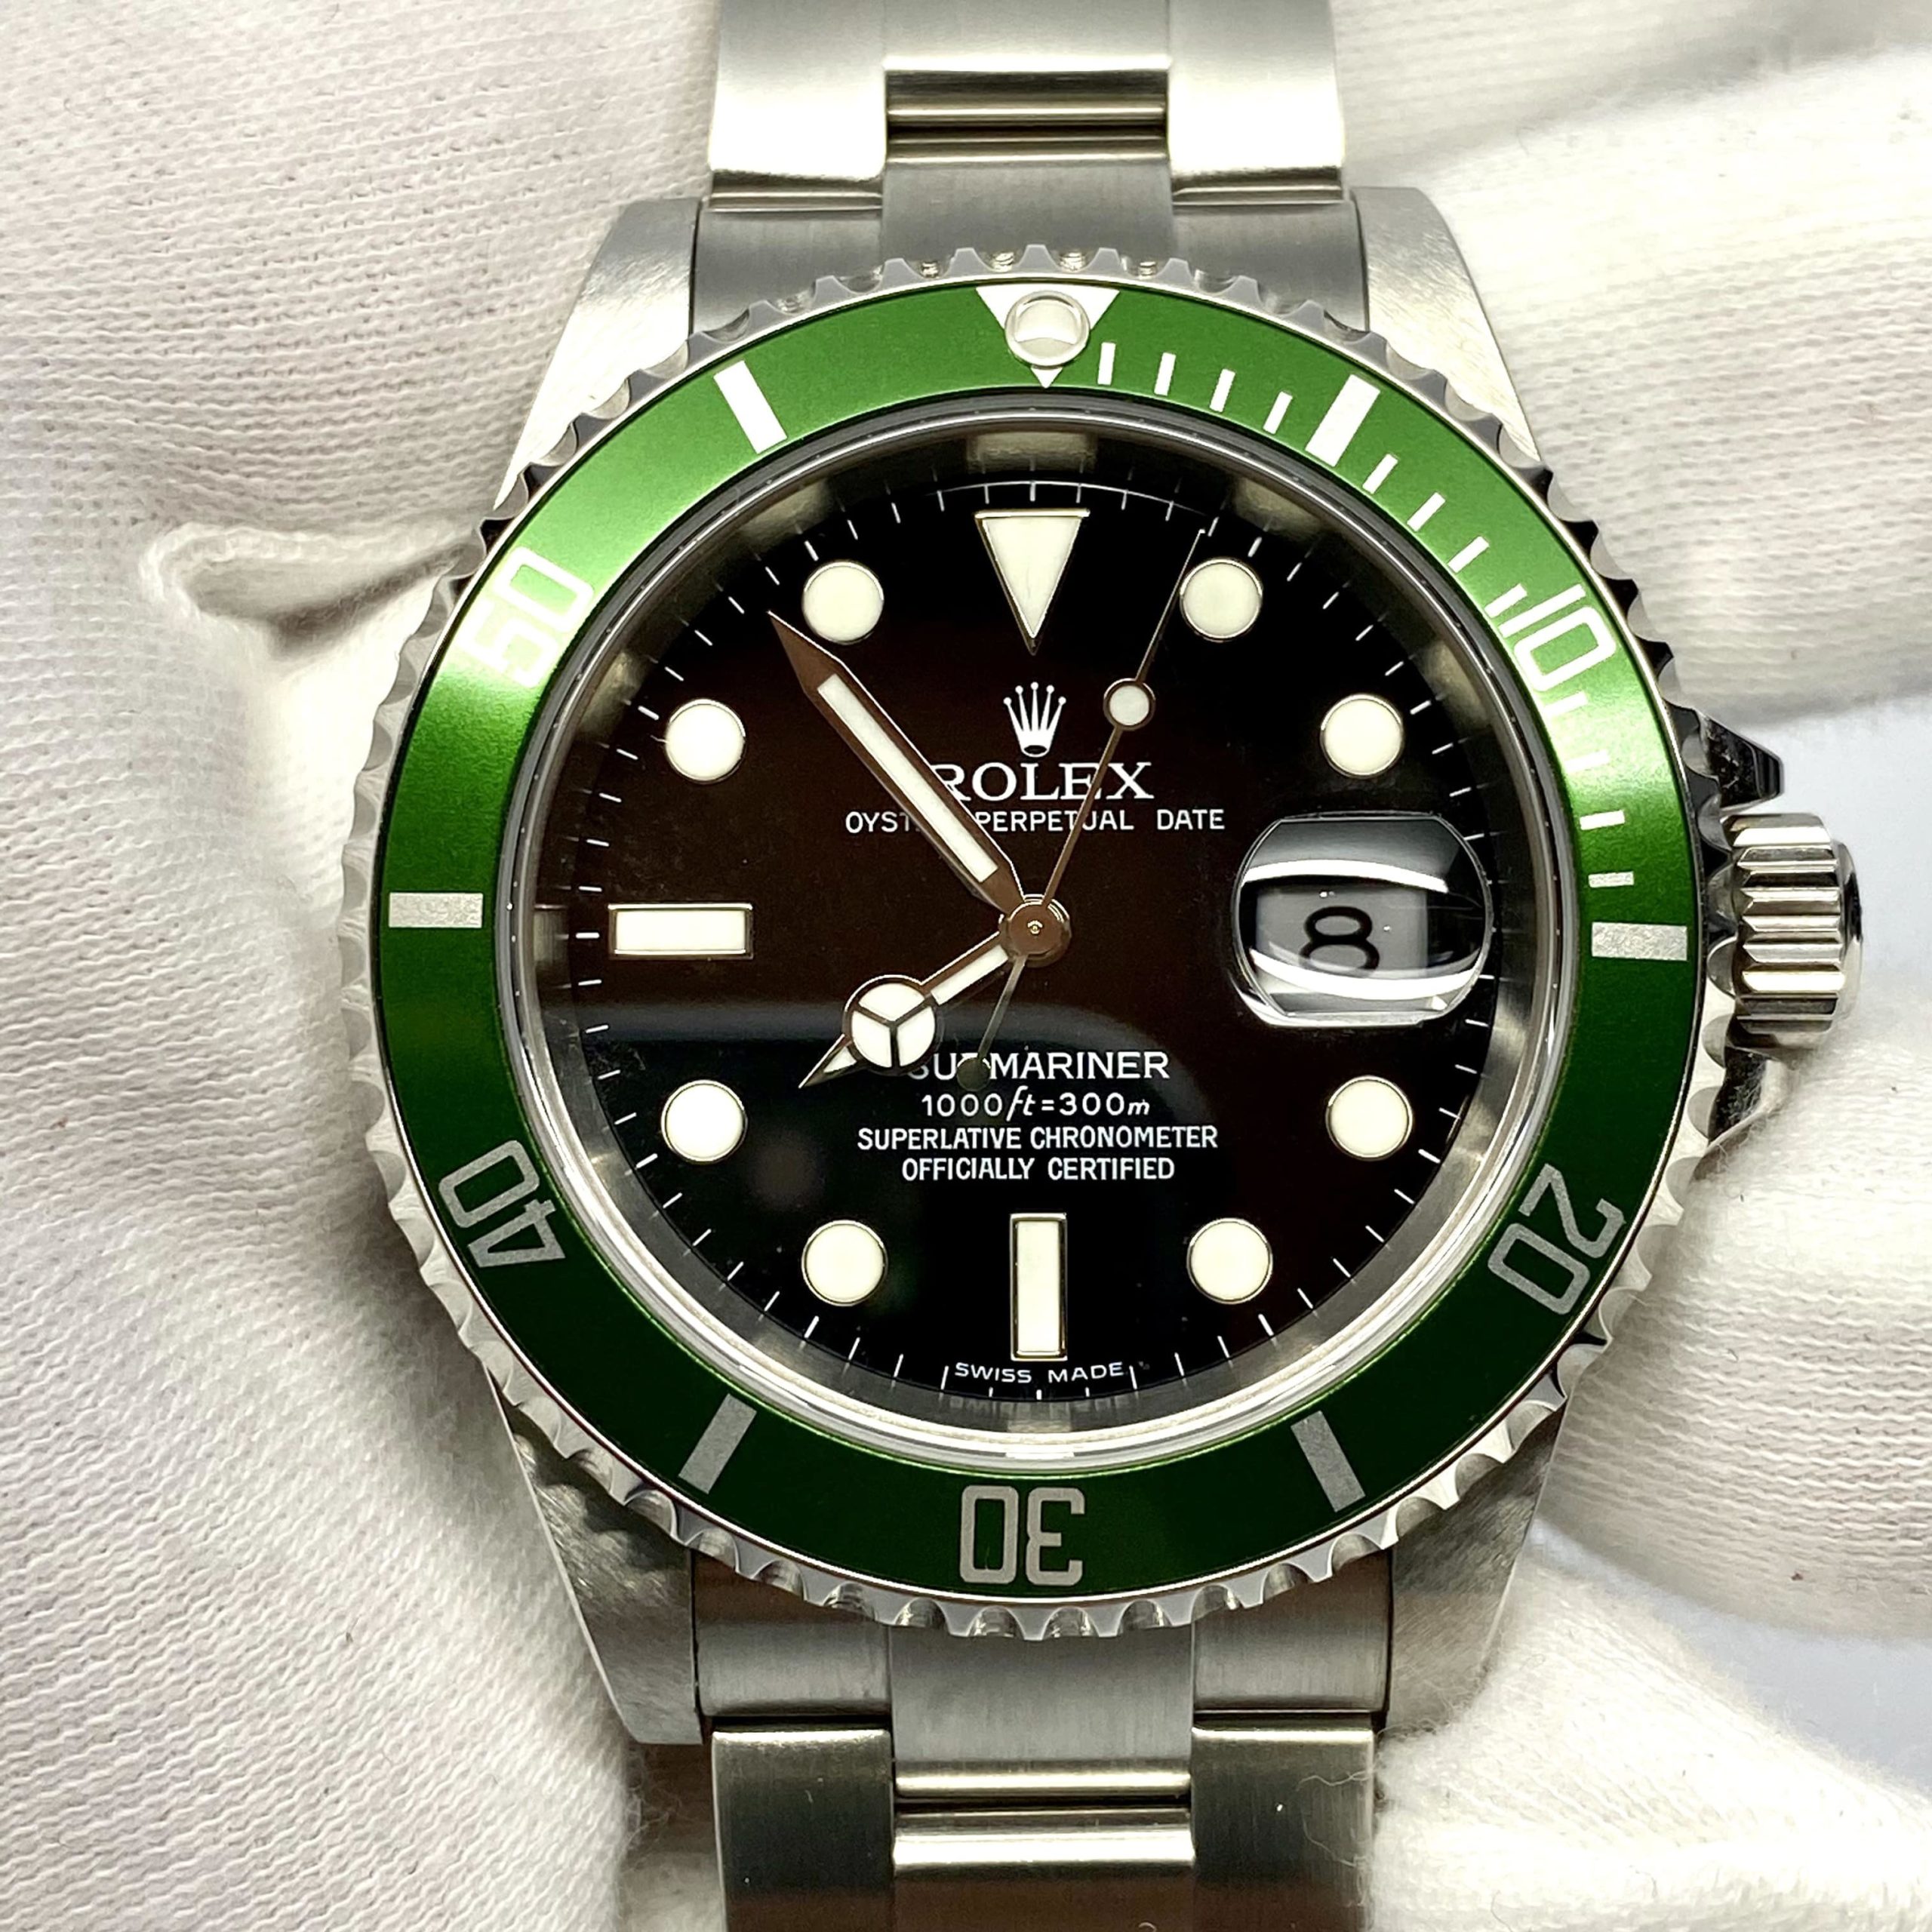 Rolex Submariner 50th Anniversary History Hot Sale, UP TO 58% OFF www.realliganaval.com